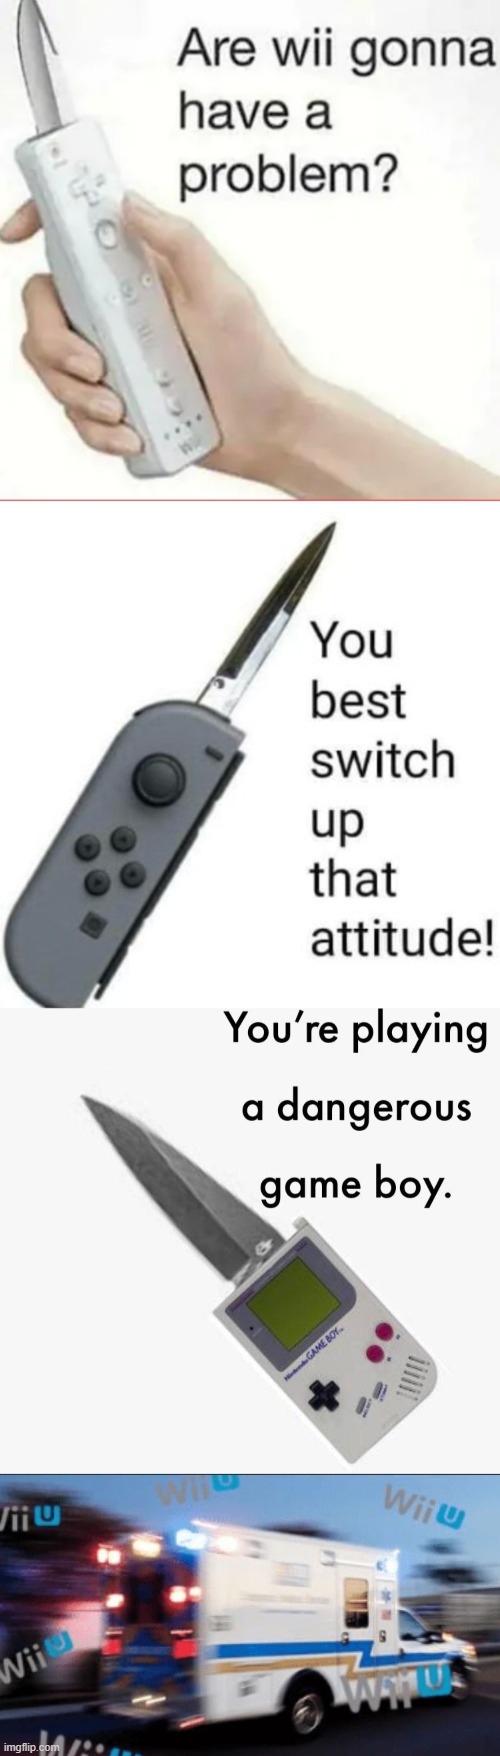 image tagged in are wii gonna have a problem,you best switch up that attitude,your playing a dangerous gameboy | made w/ Imgflip meme maker